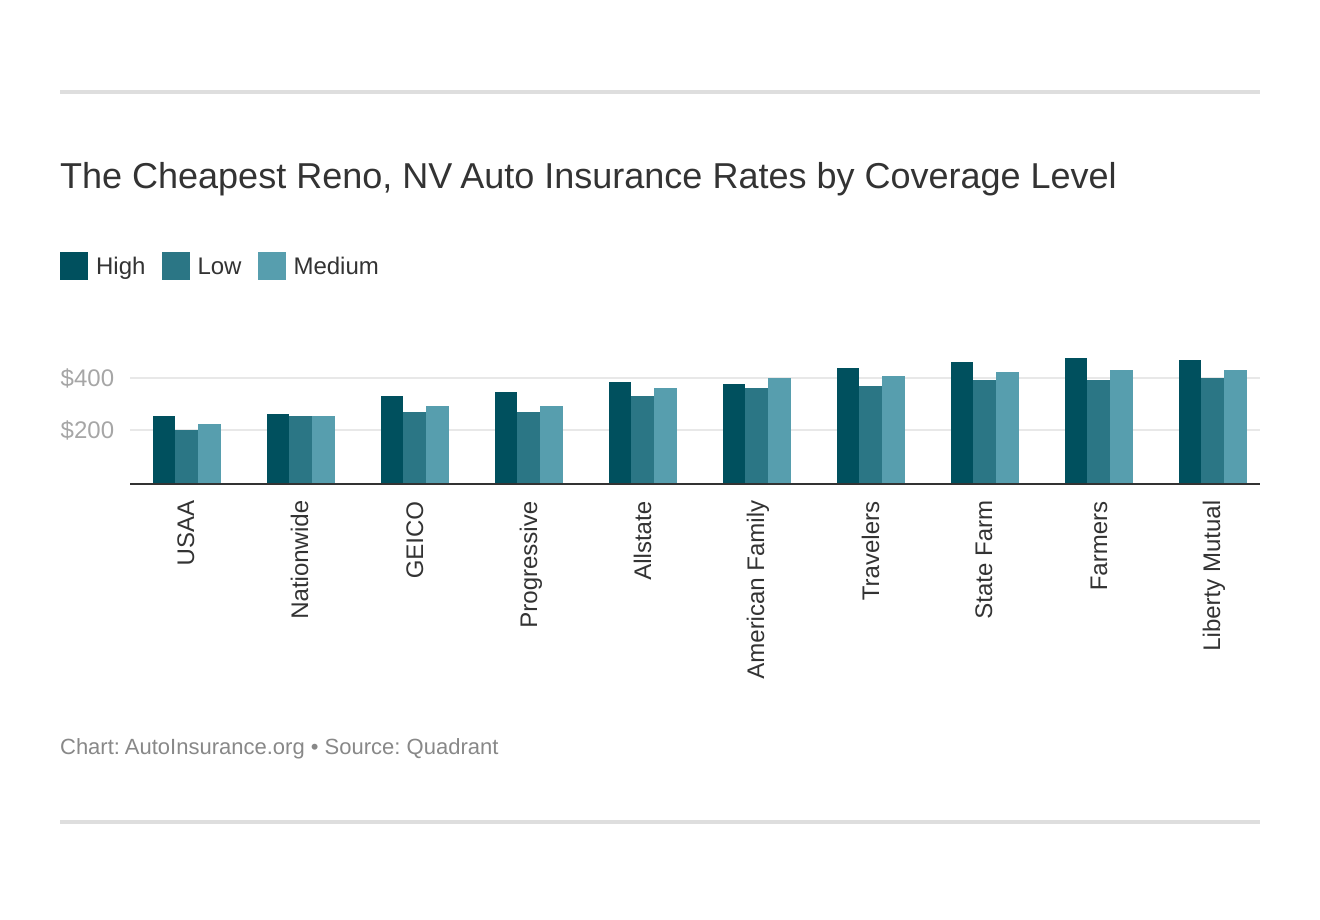 The Cheapest Reno, NV Auto Insurance Rates by Coverage Level